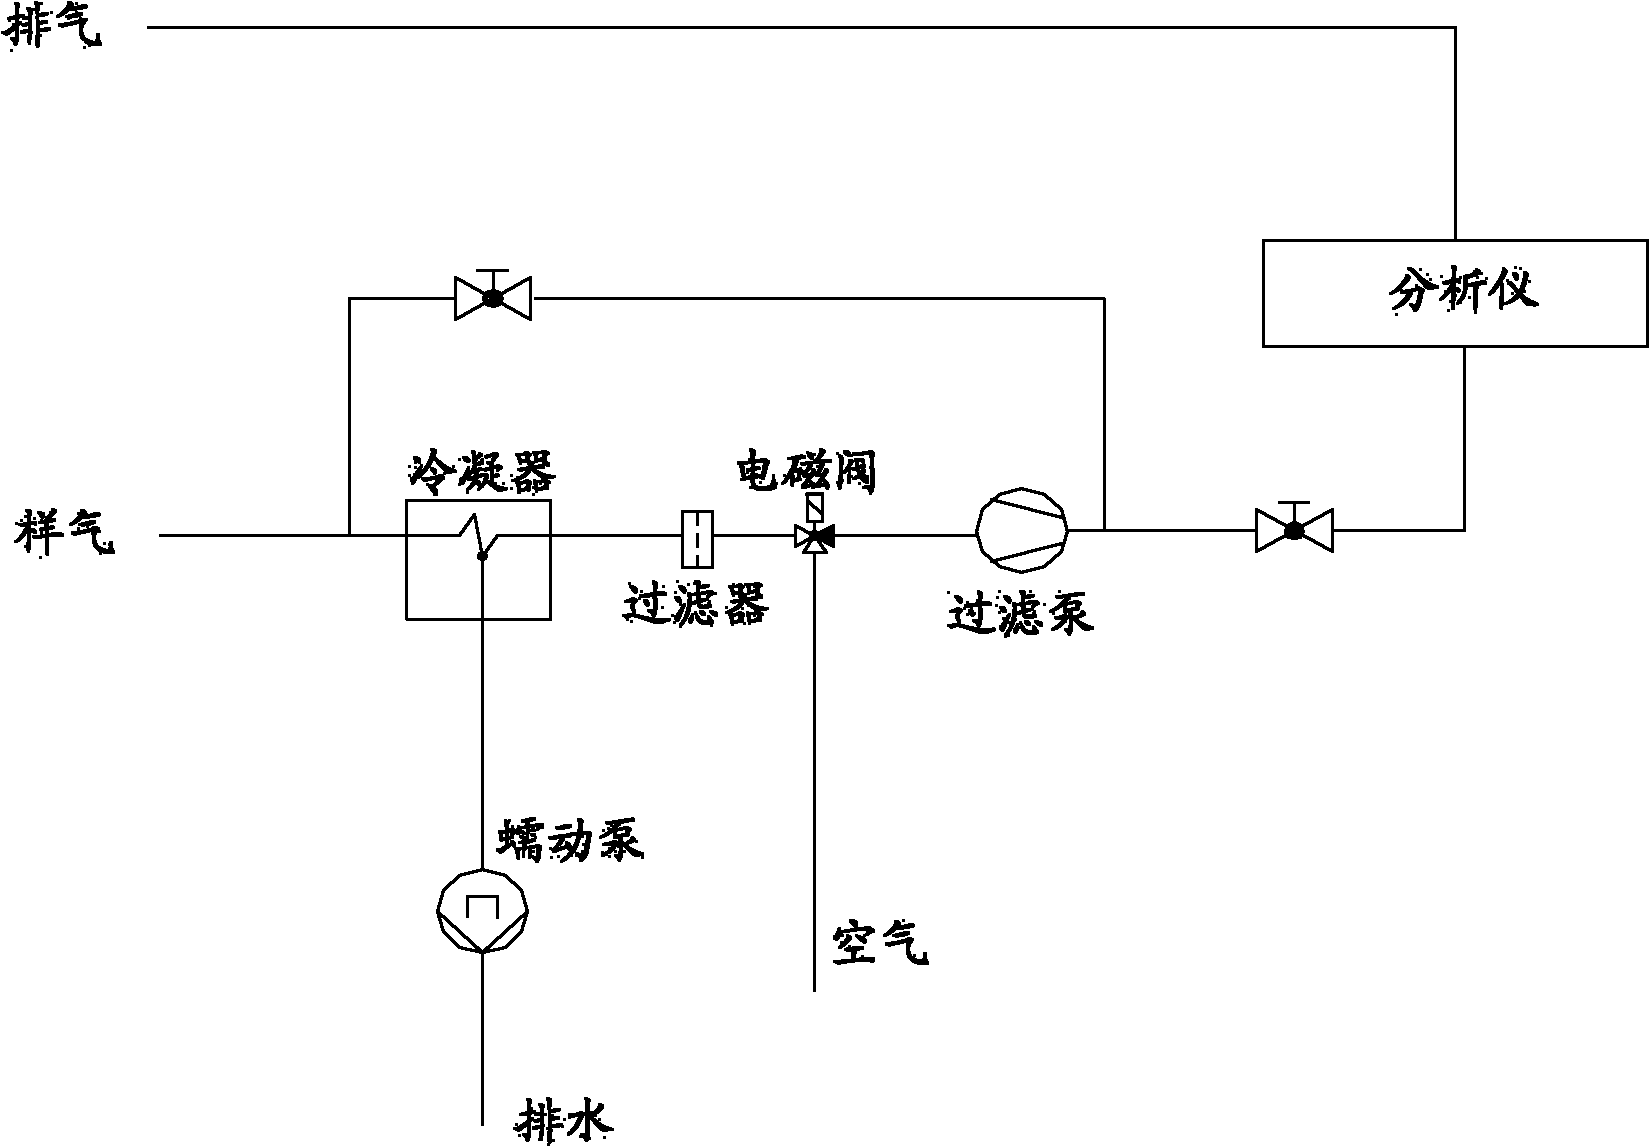 Infrared gas analysis pretreatment system